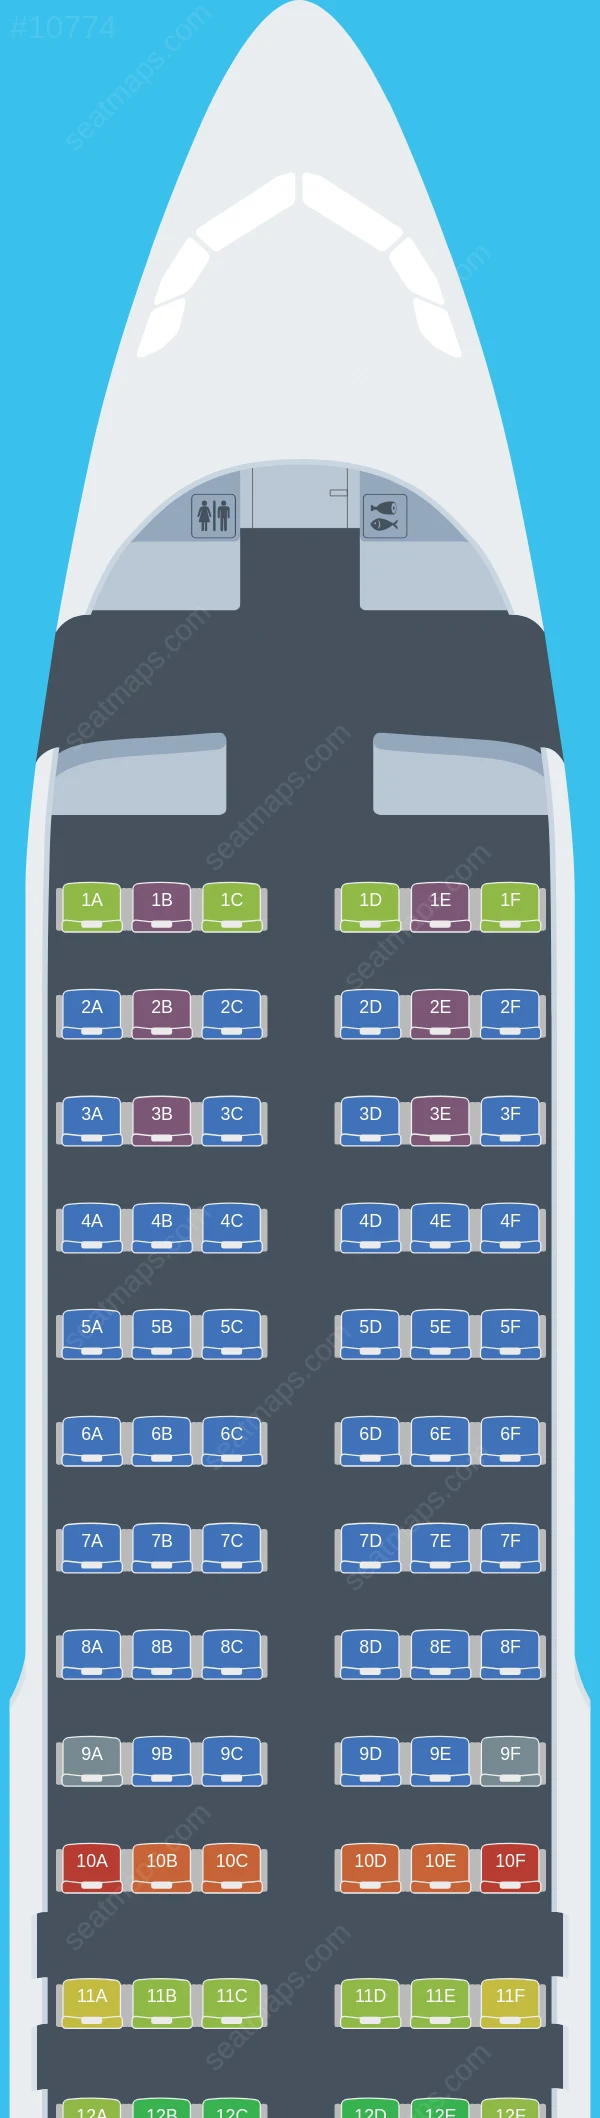 Avianca Airbus A320-200 V.3 seatmap preview